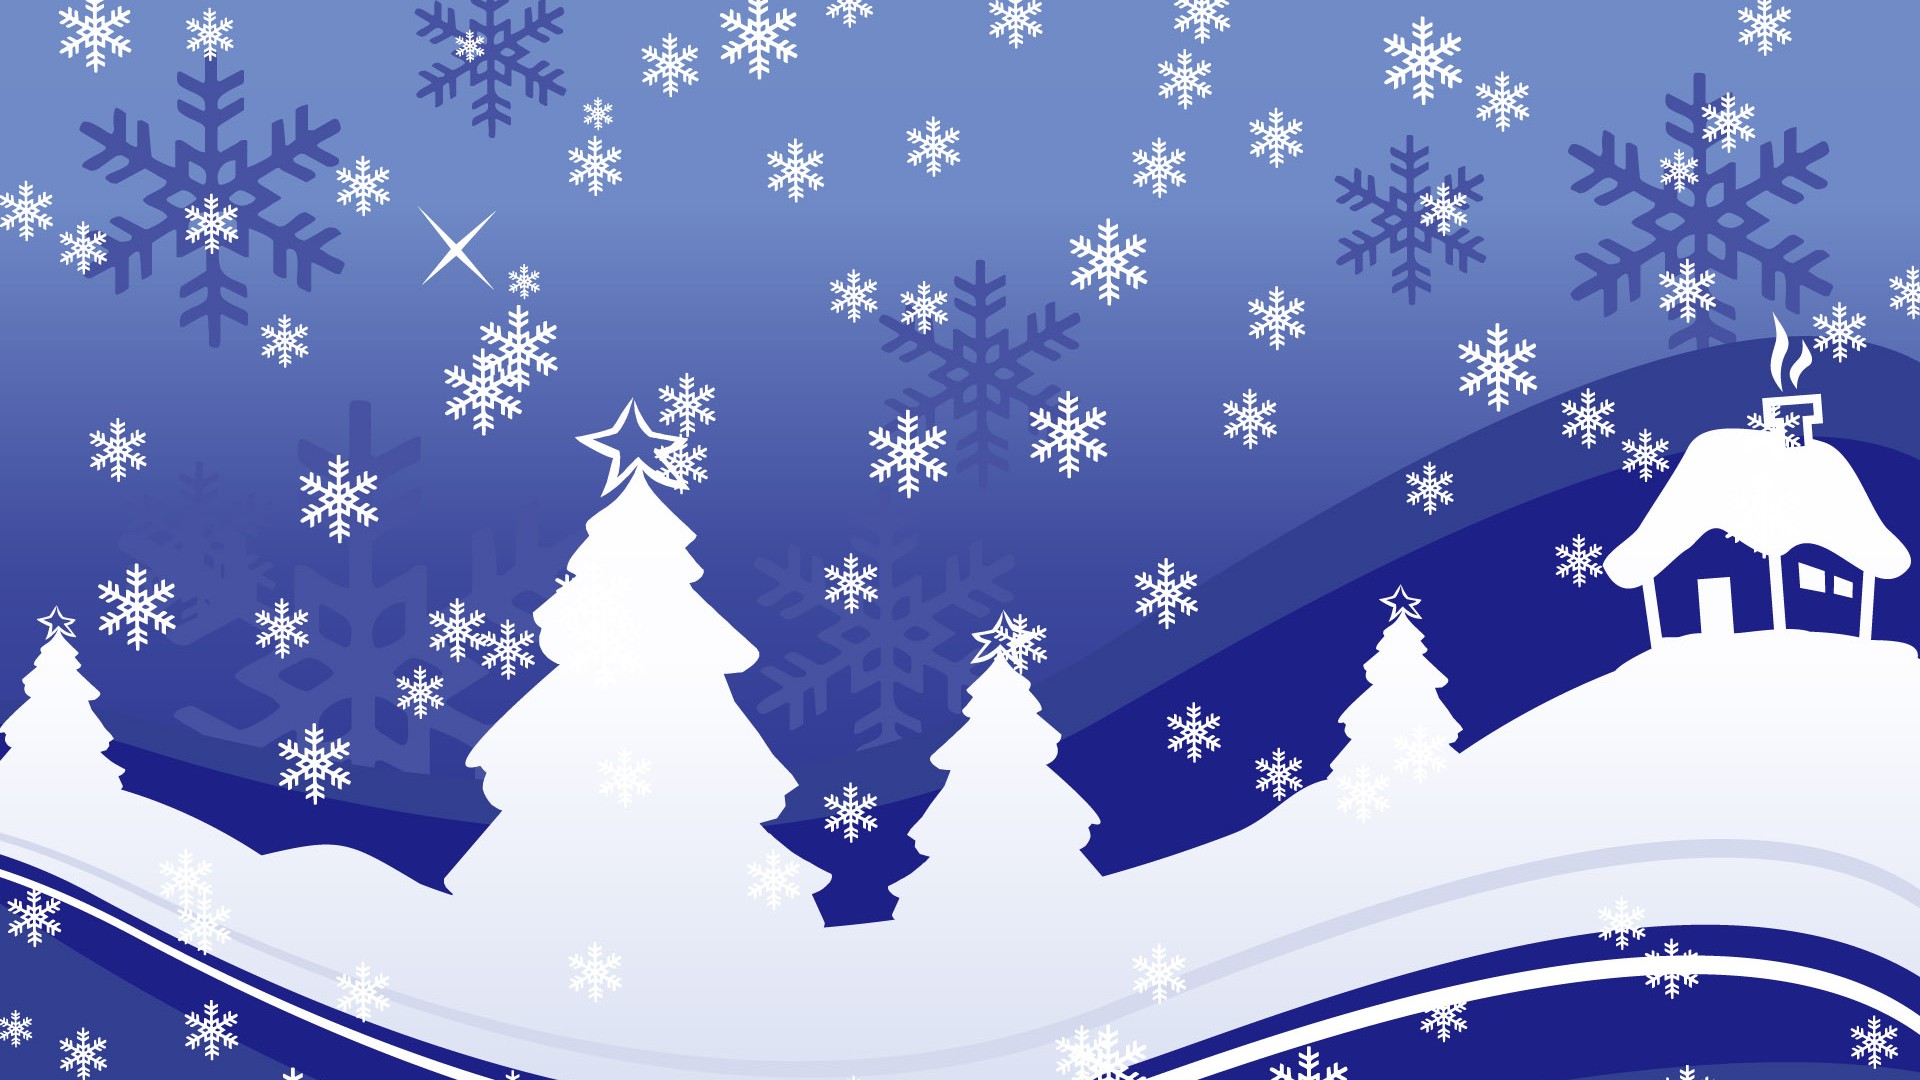 Exquisite Christmas Theme HD Wallpapers #33 - 1920x1080